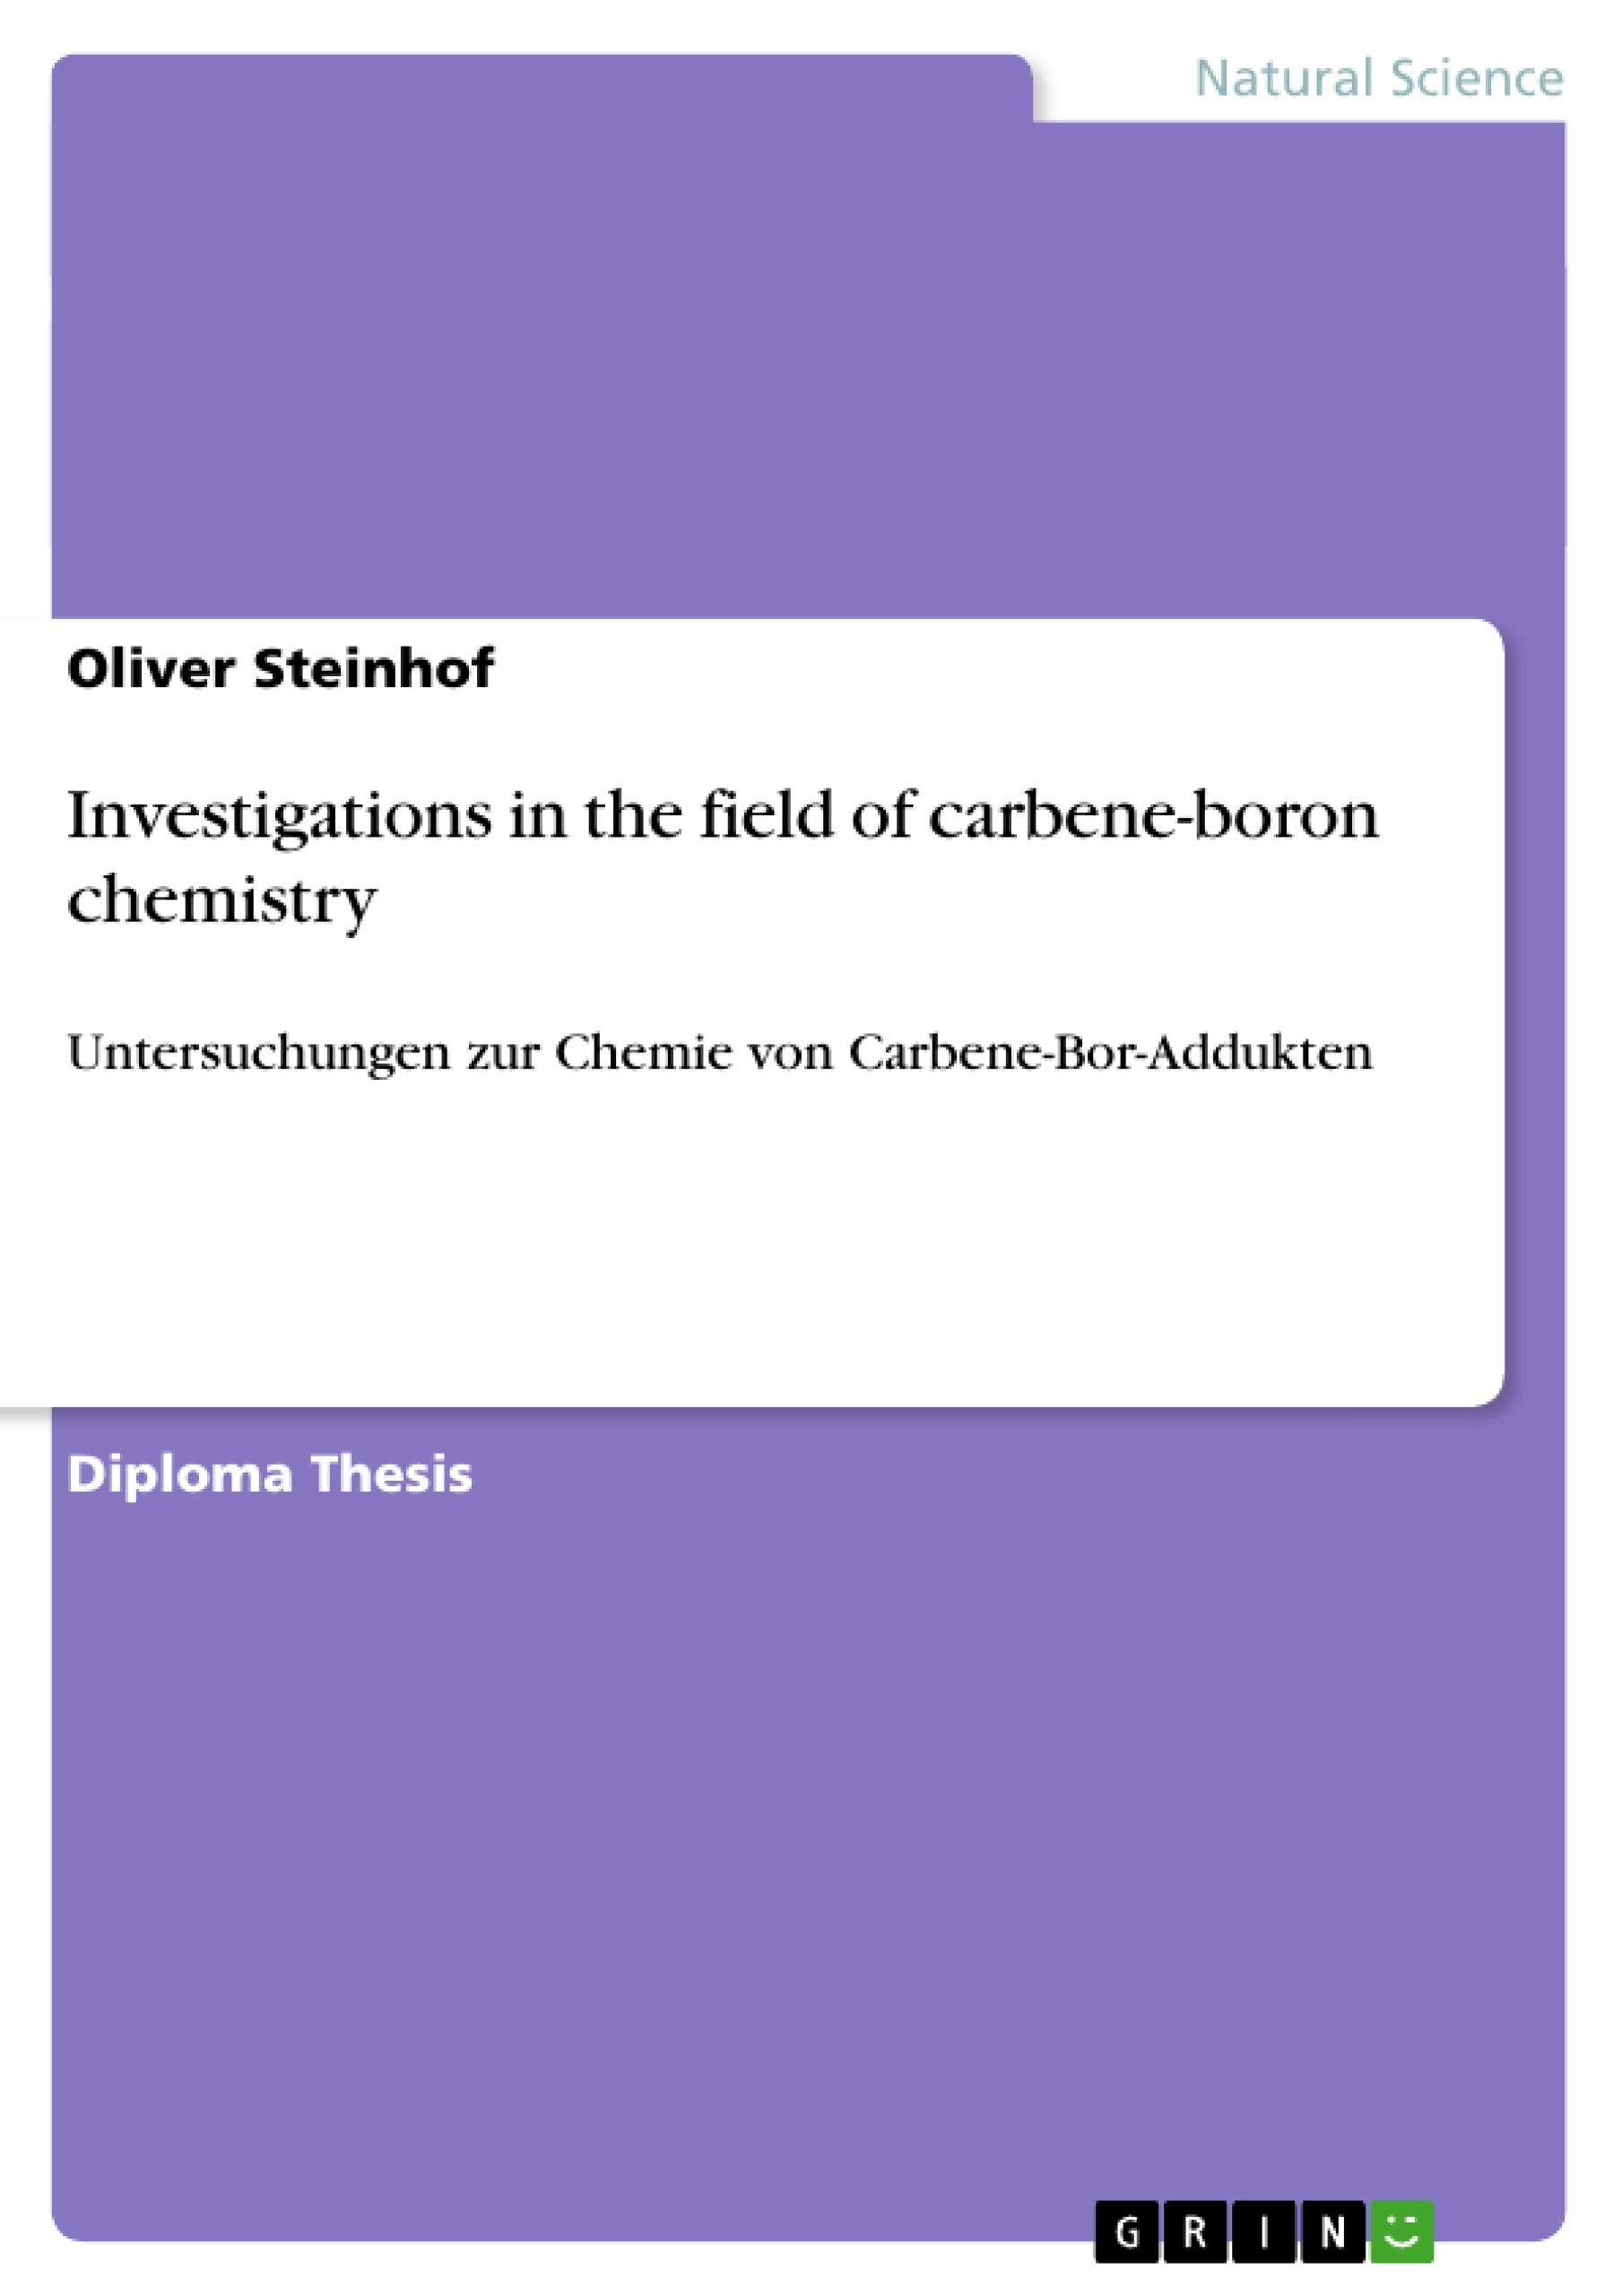 Title: Investigations in the field of carbene-boron chemistry